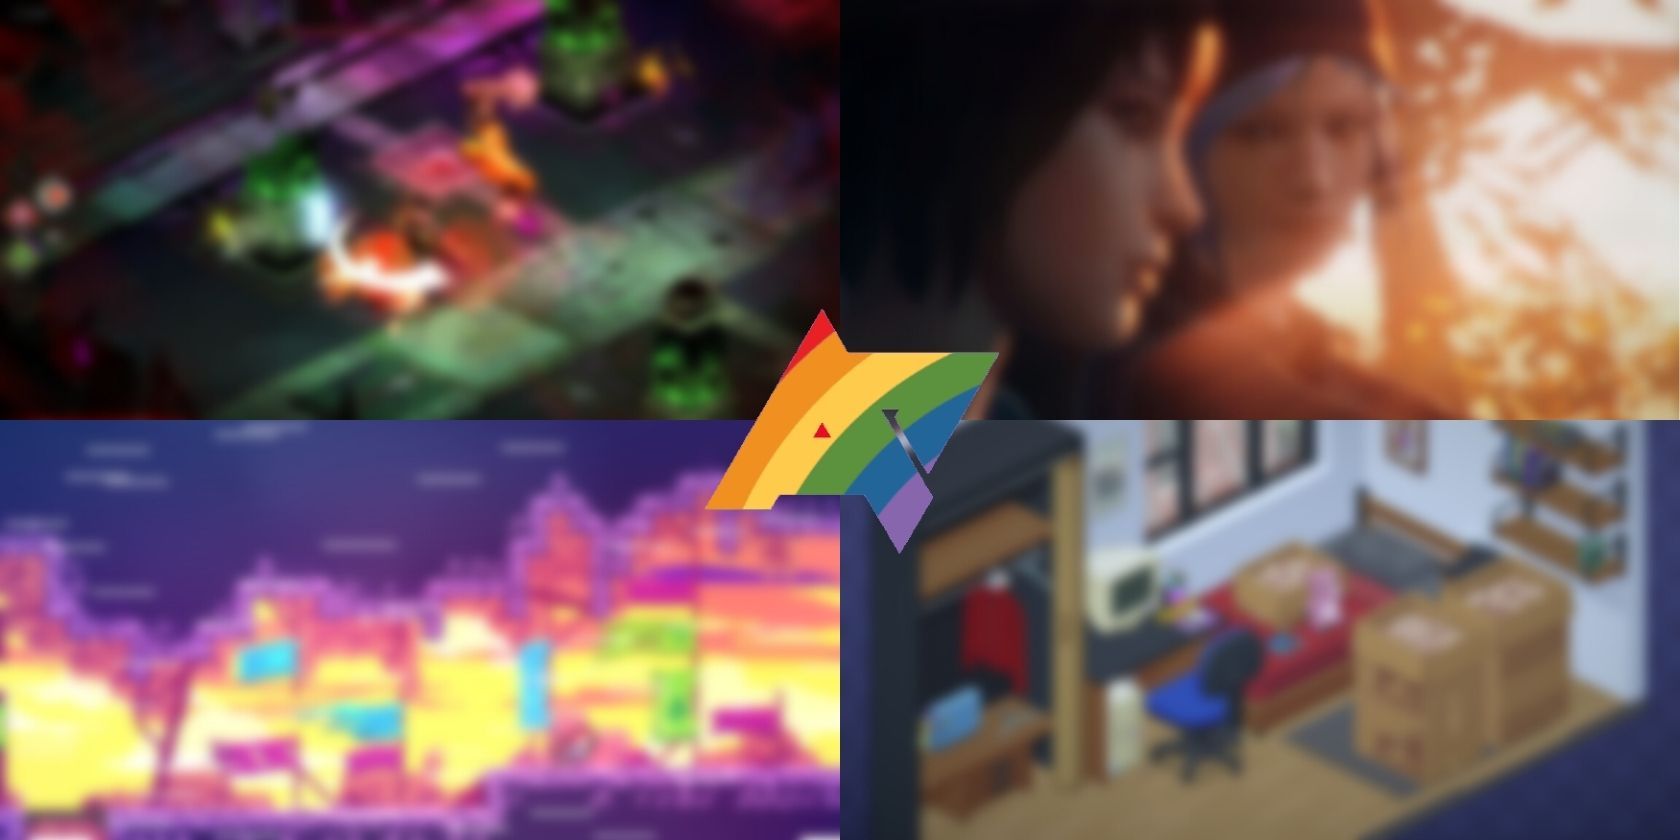 ap rainbow logo in front of blurred game screenshots